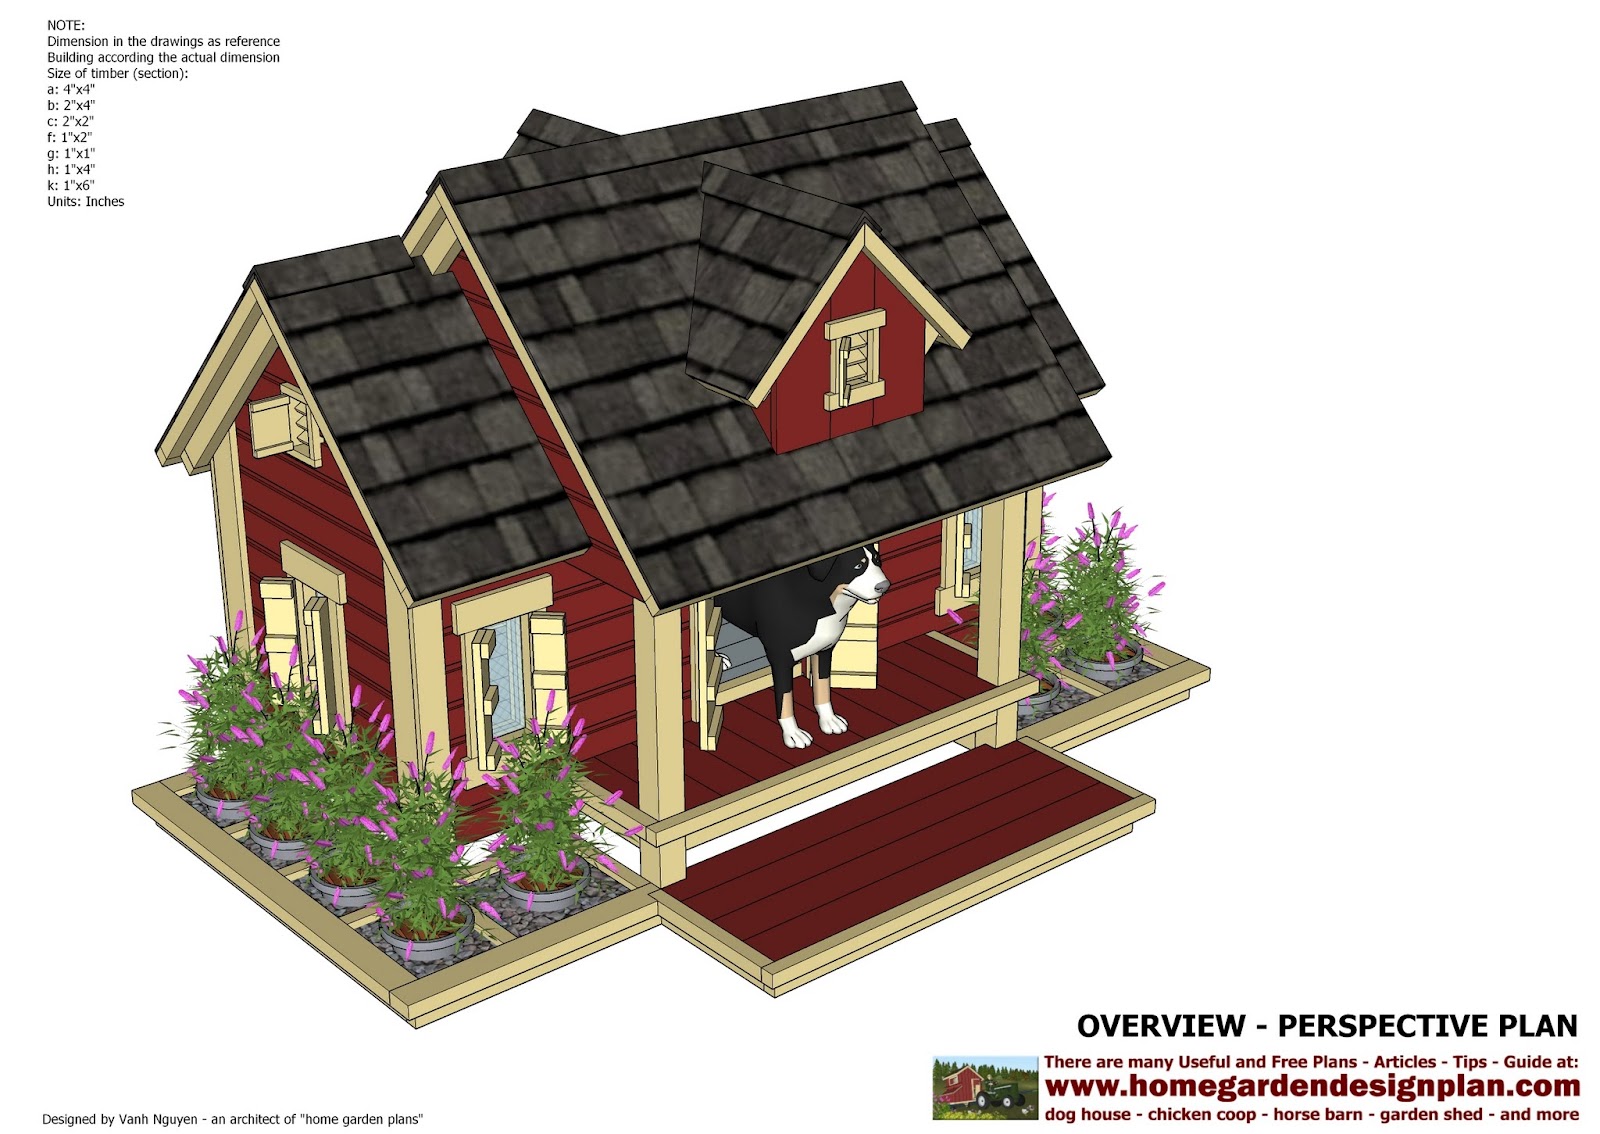 plans: DH301 - Insulated Dog House Plans - Insulated Dog House Design 